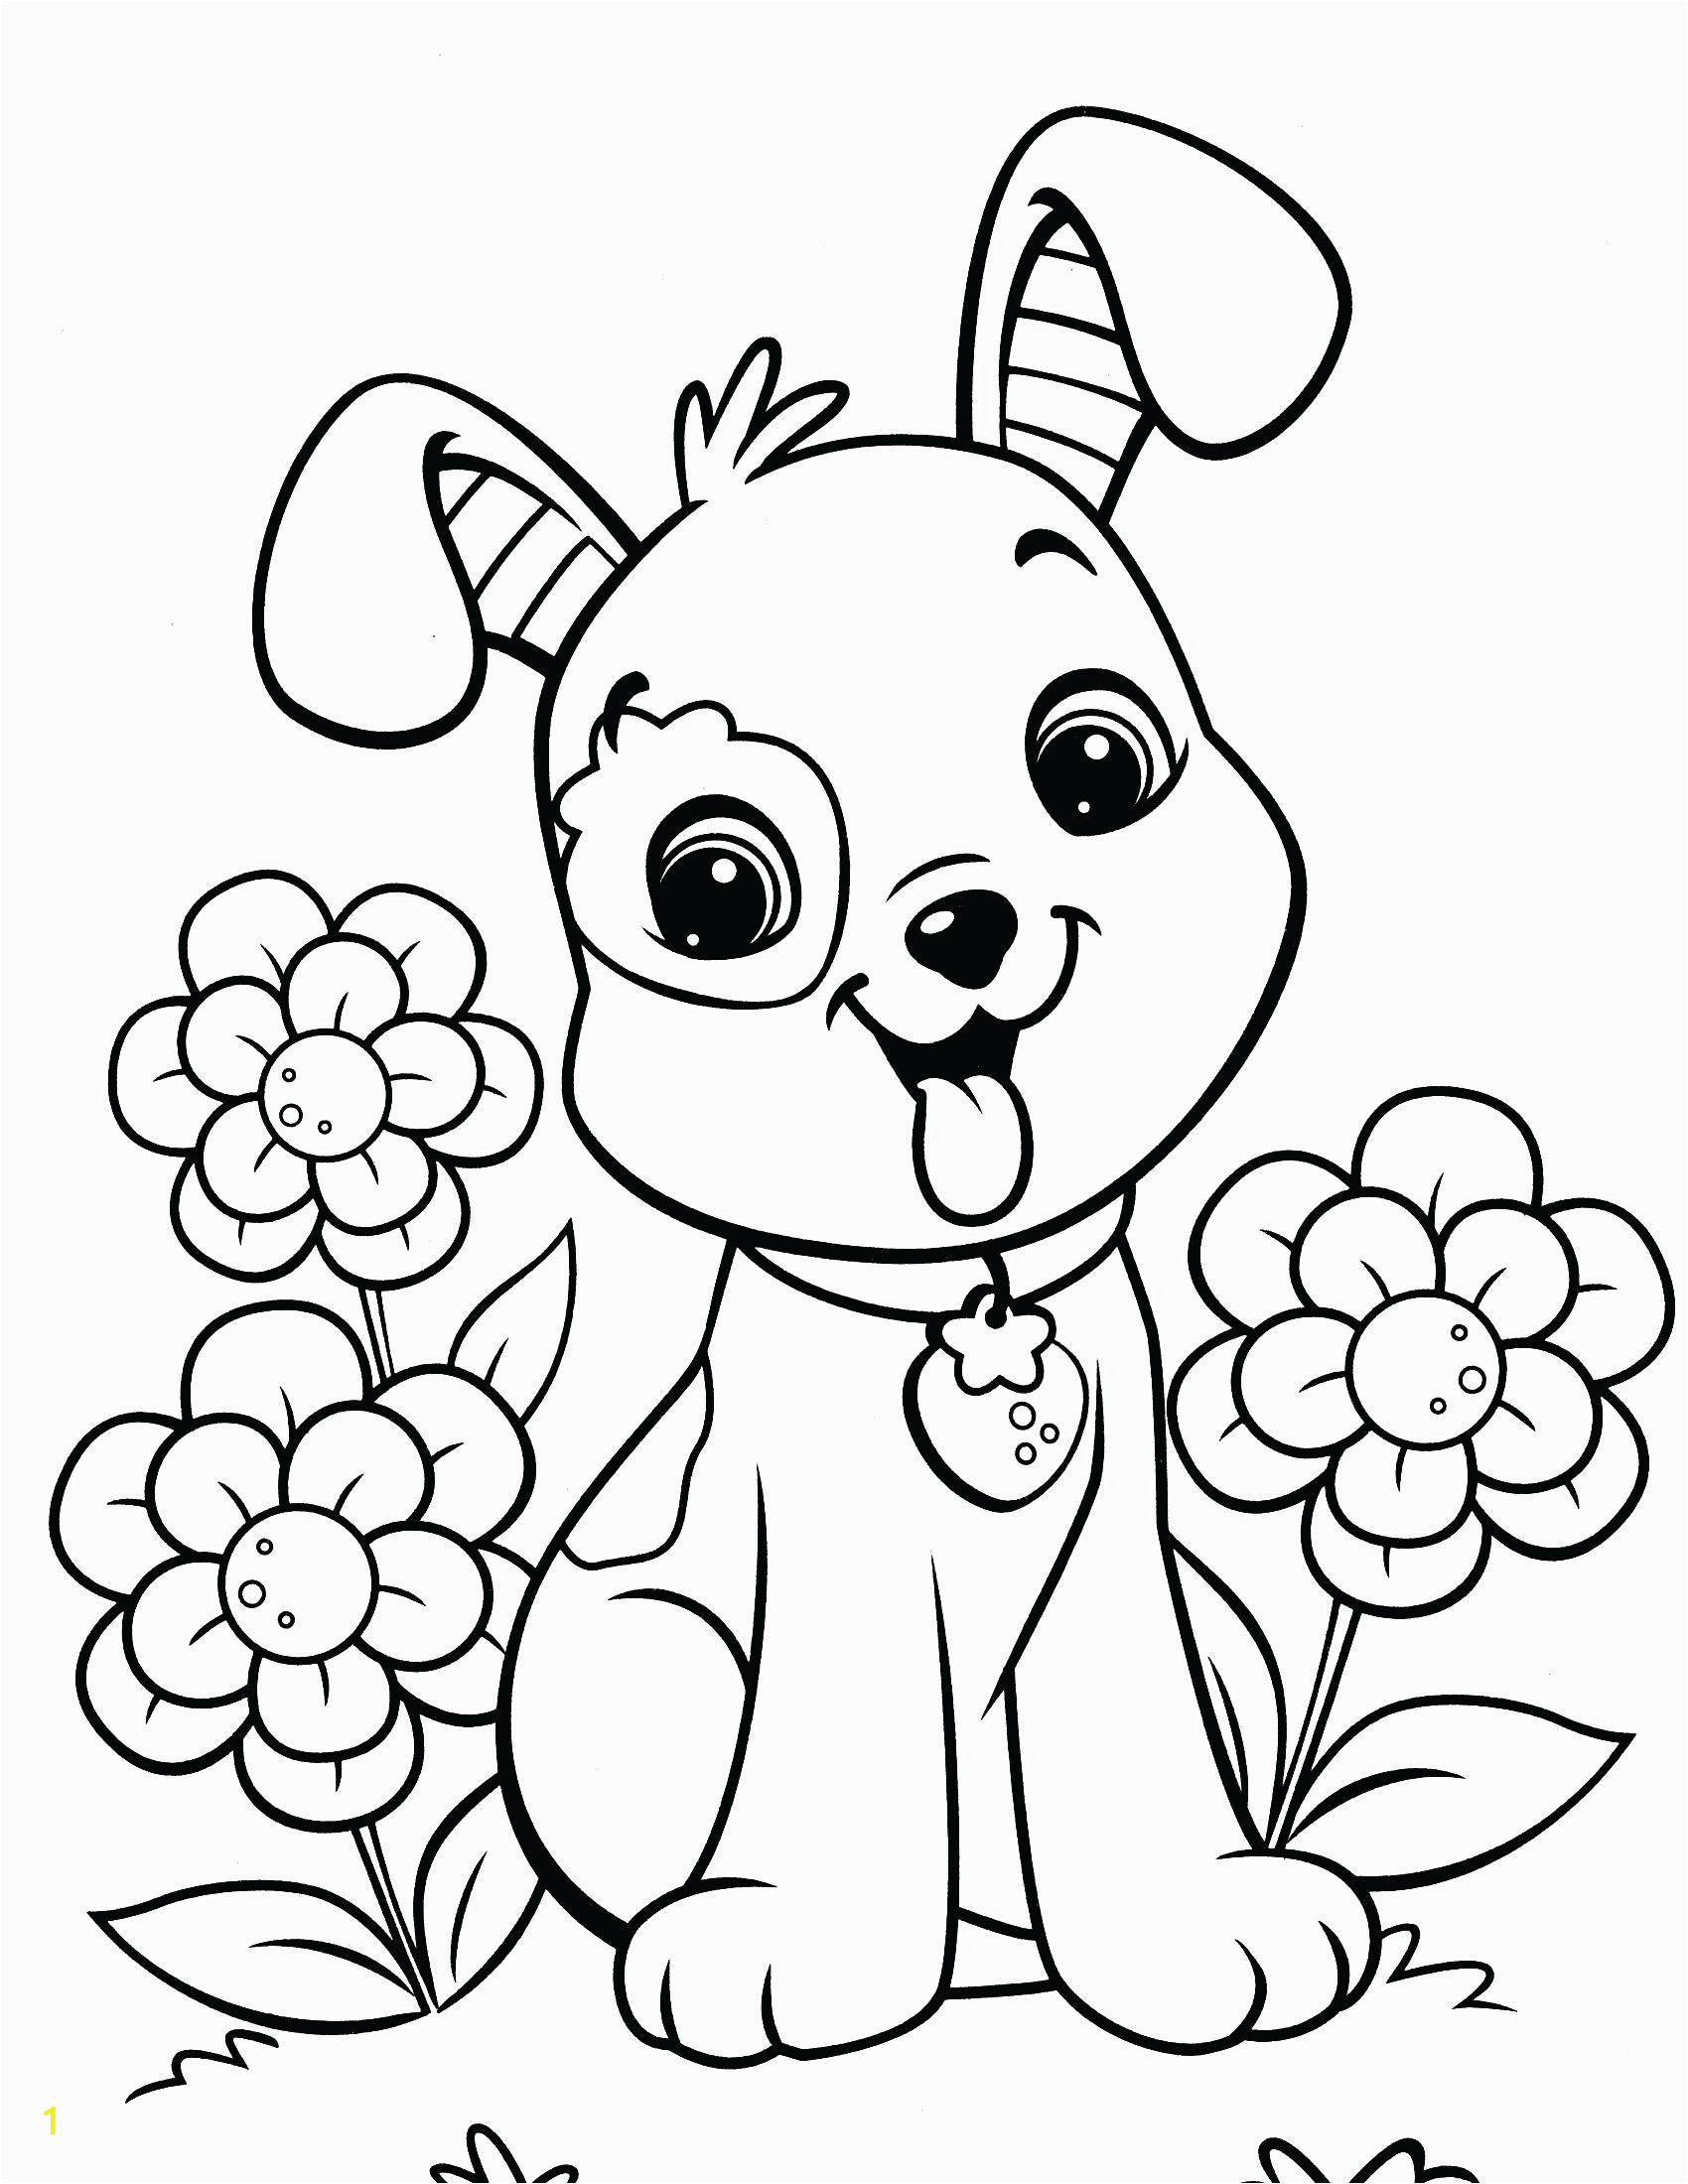 incredible preschool coloring pages free picture inspirations pets spartanprint co puppy beagle to print printable pictures of puppies and kittens color boxer for kids